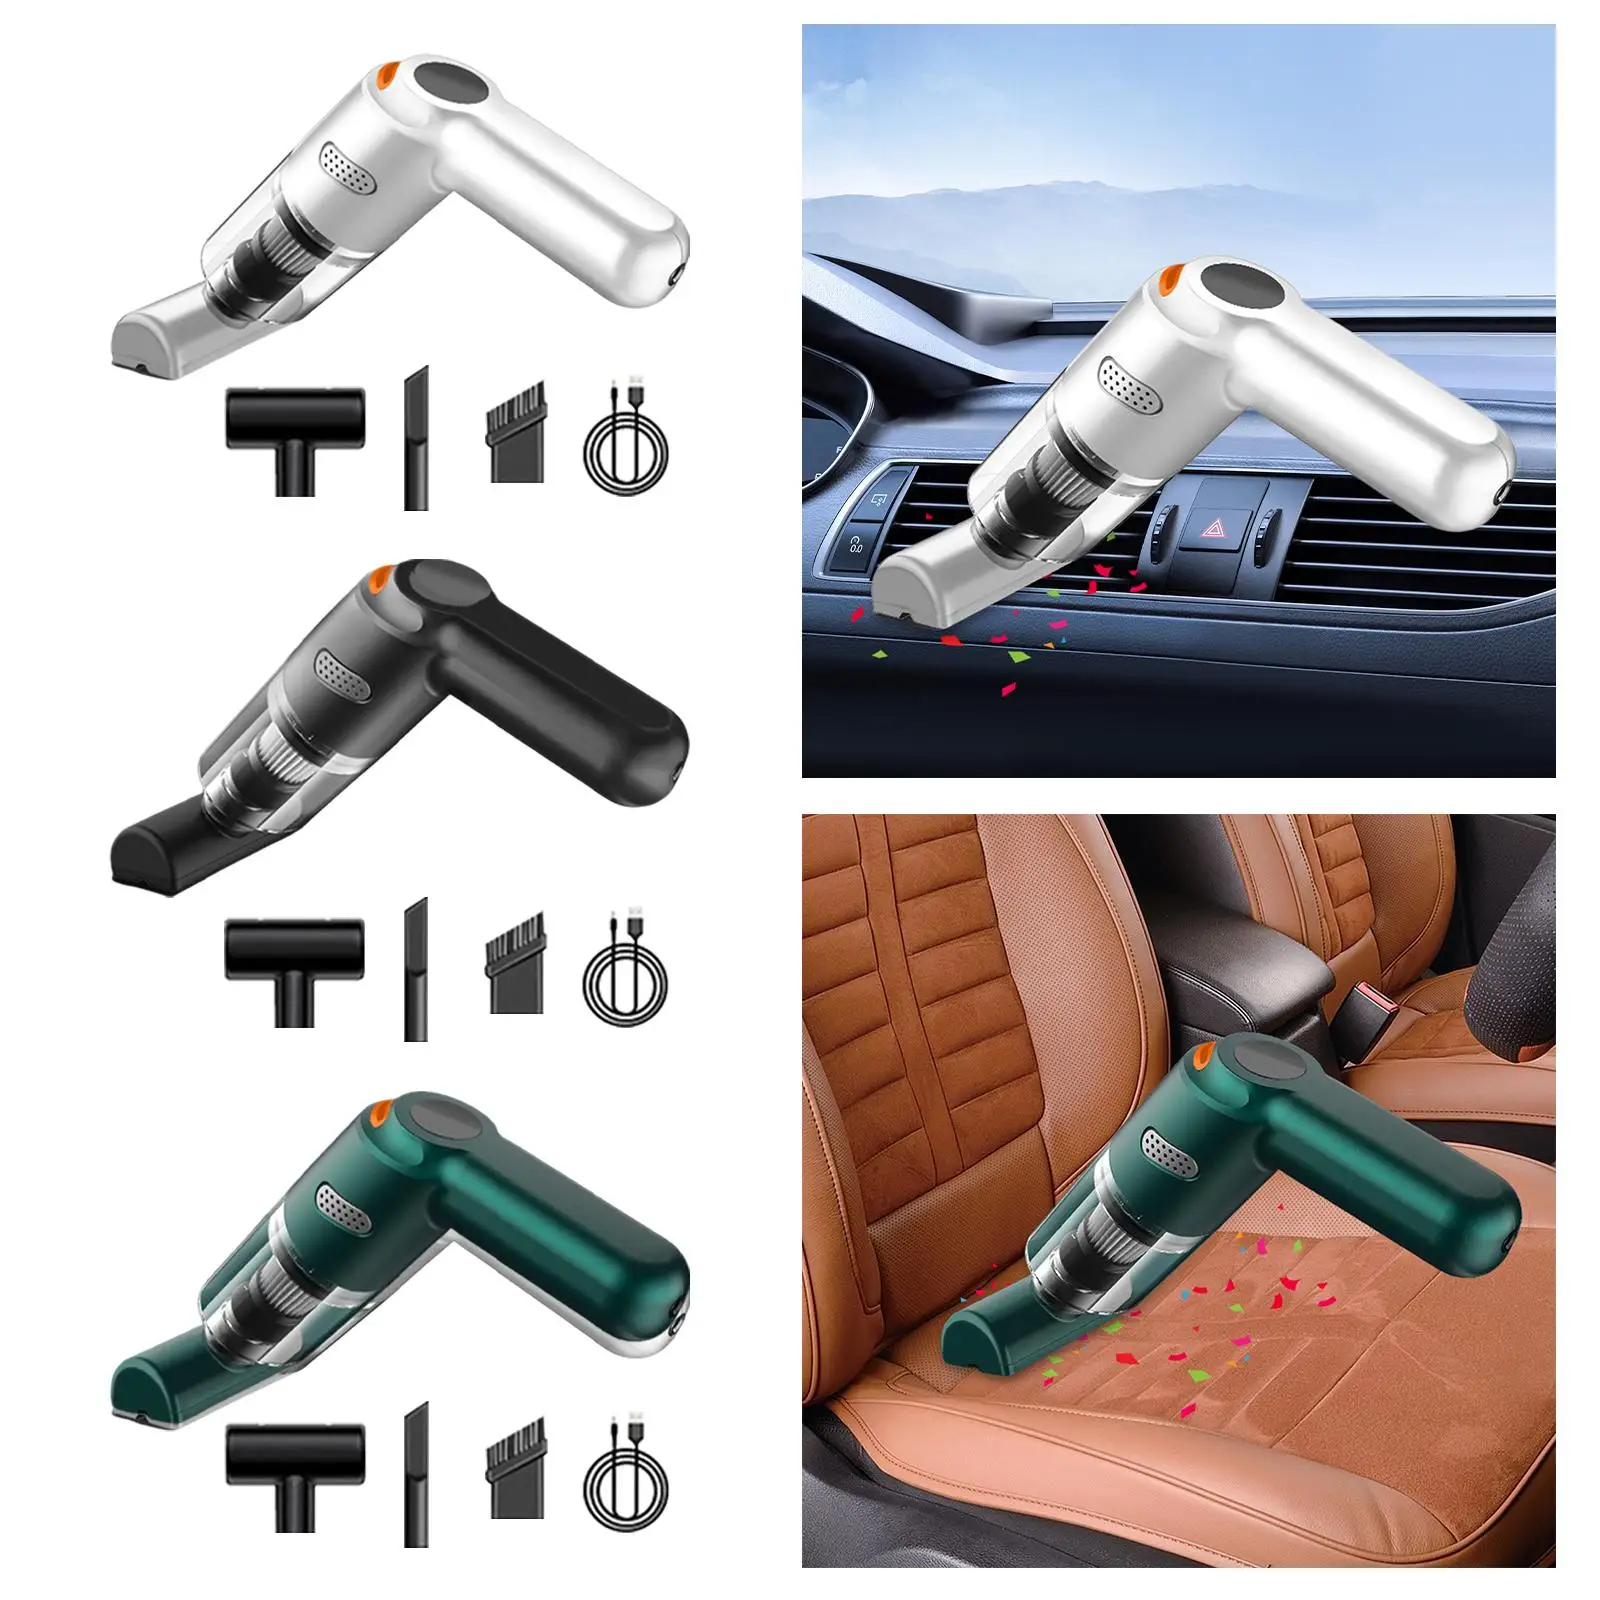 Mini Car Vacuum Cleaner Rechargeable 120W Handheld Duster Lightweight Cordless for car home PC Cleaning Paper Scraps Office